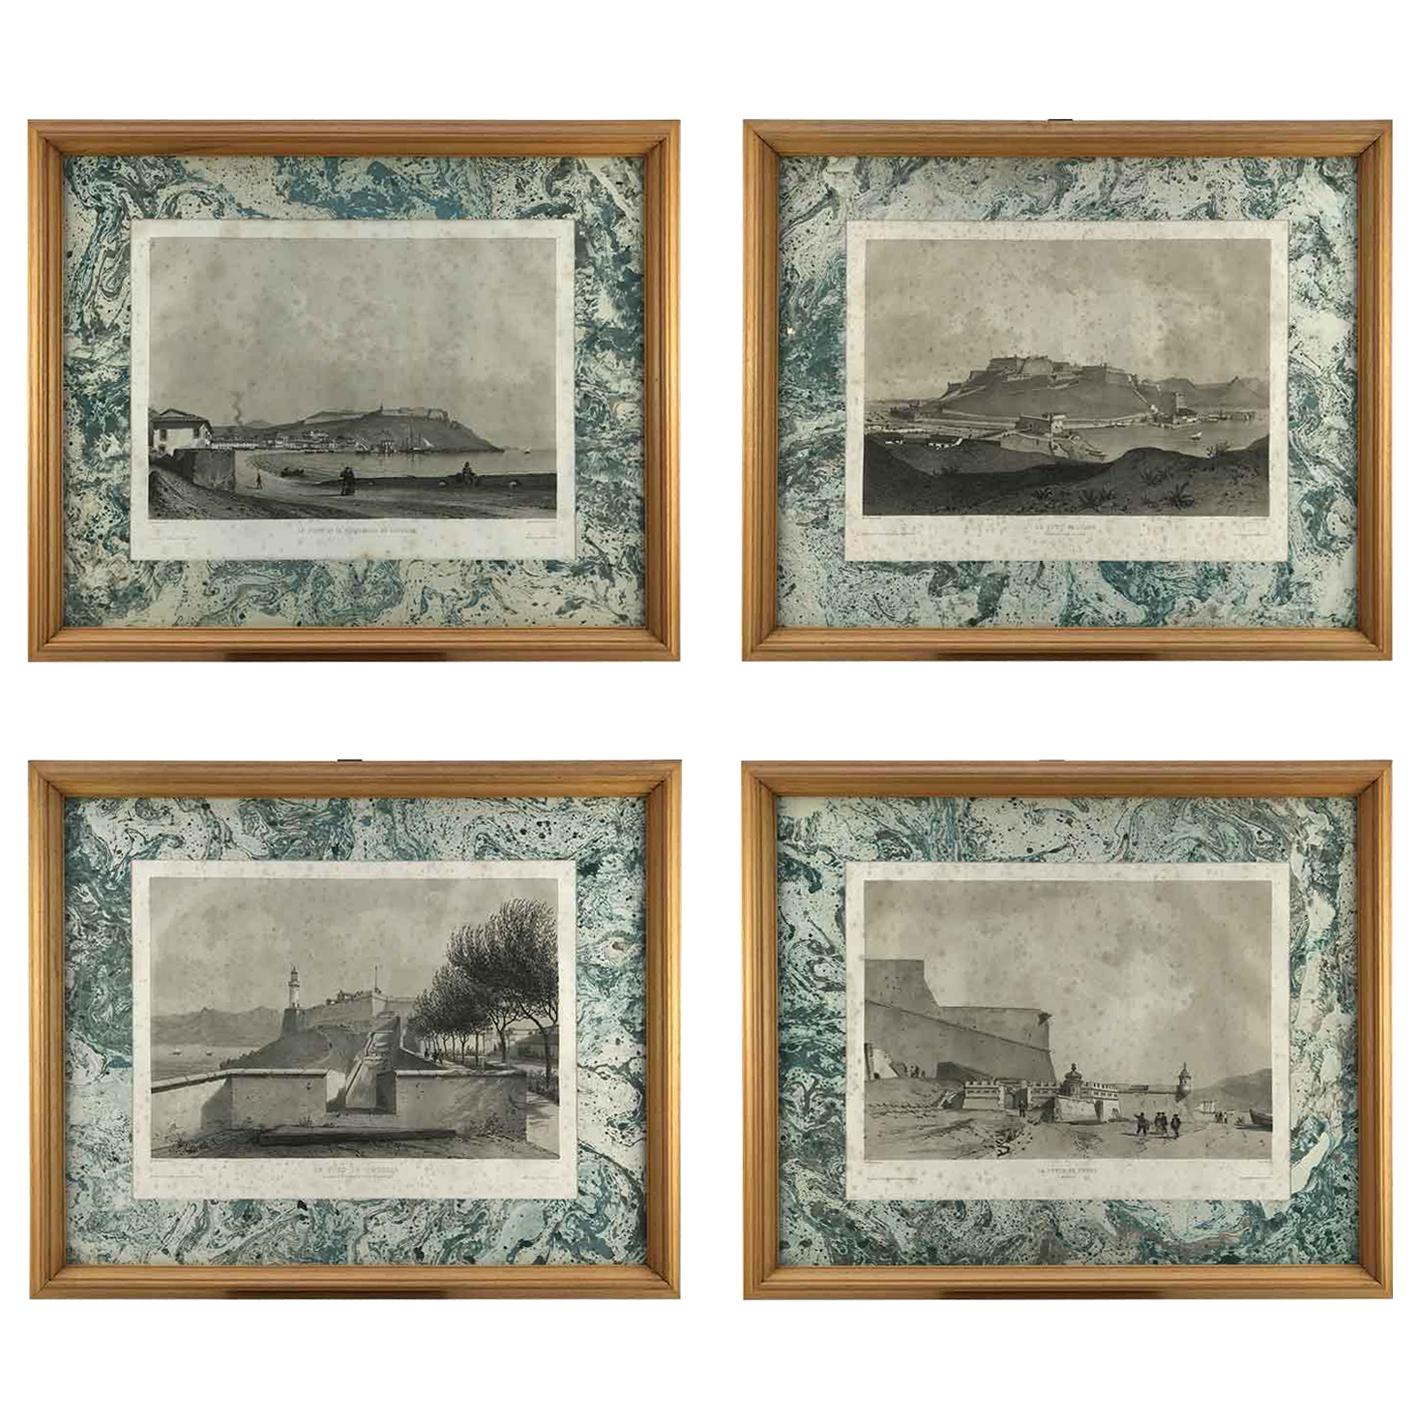 Set of Four Italian Views of Elba Island by Andre Durand 1862